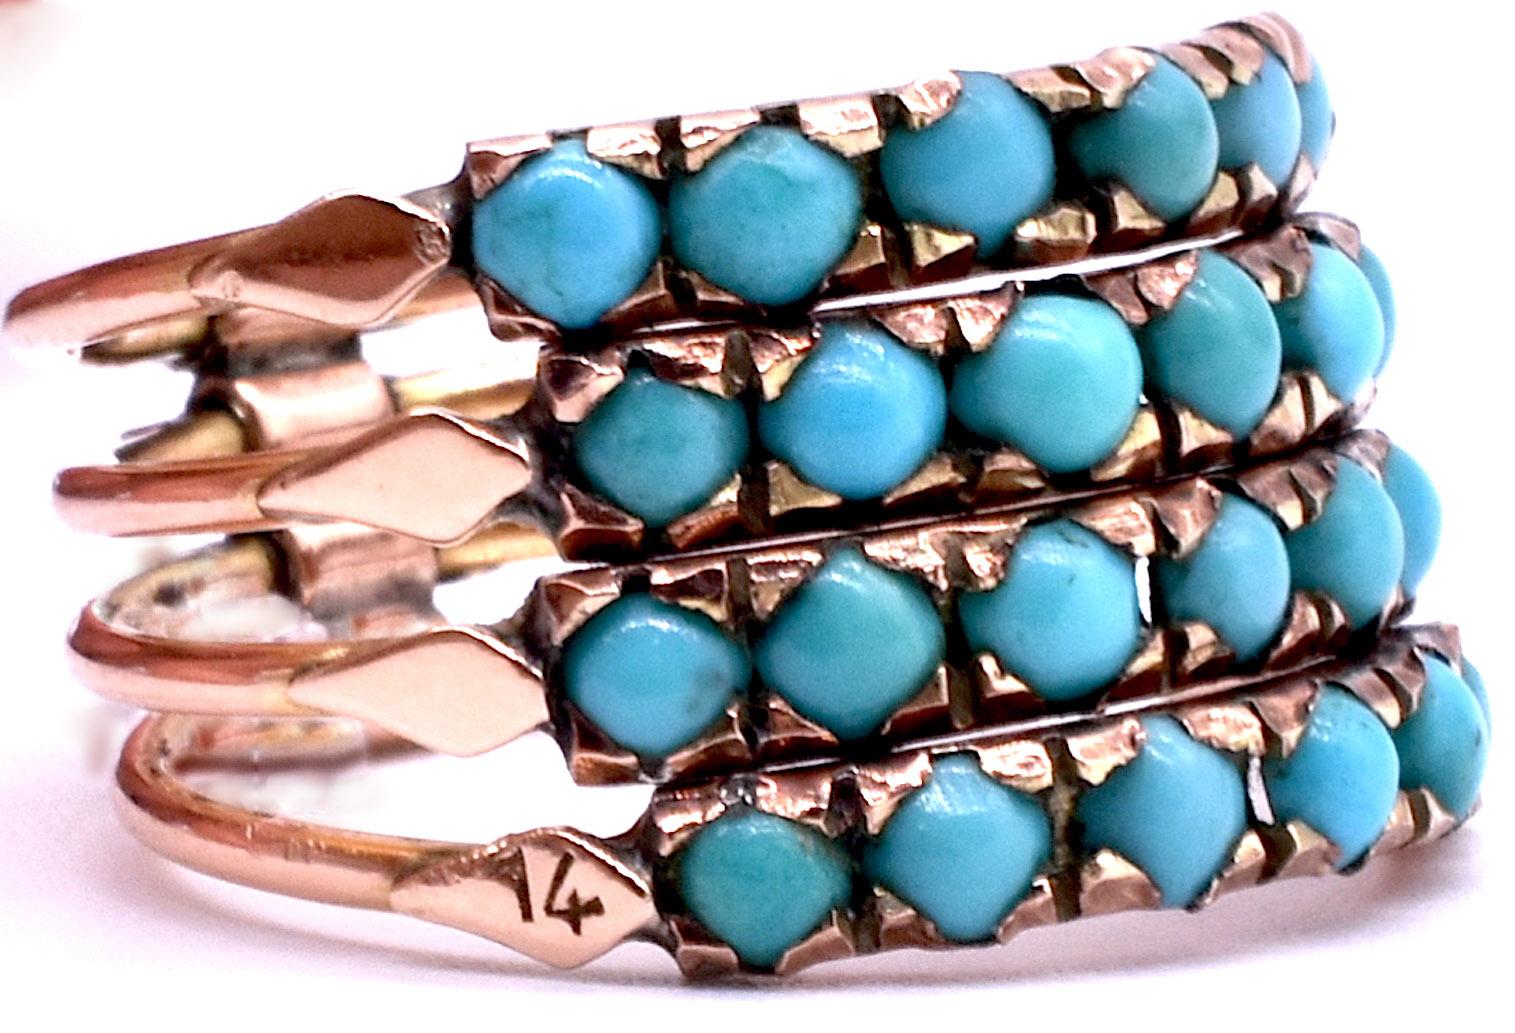 Alluring sky blue turquoise Harem ring is 4 rings stacked together as one substantial stacking ring to make a bold statement on the hand. The turquoise stones are in very good condition and of consistent color and contrast beautifully against the